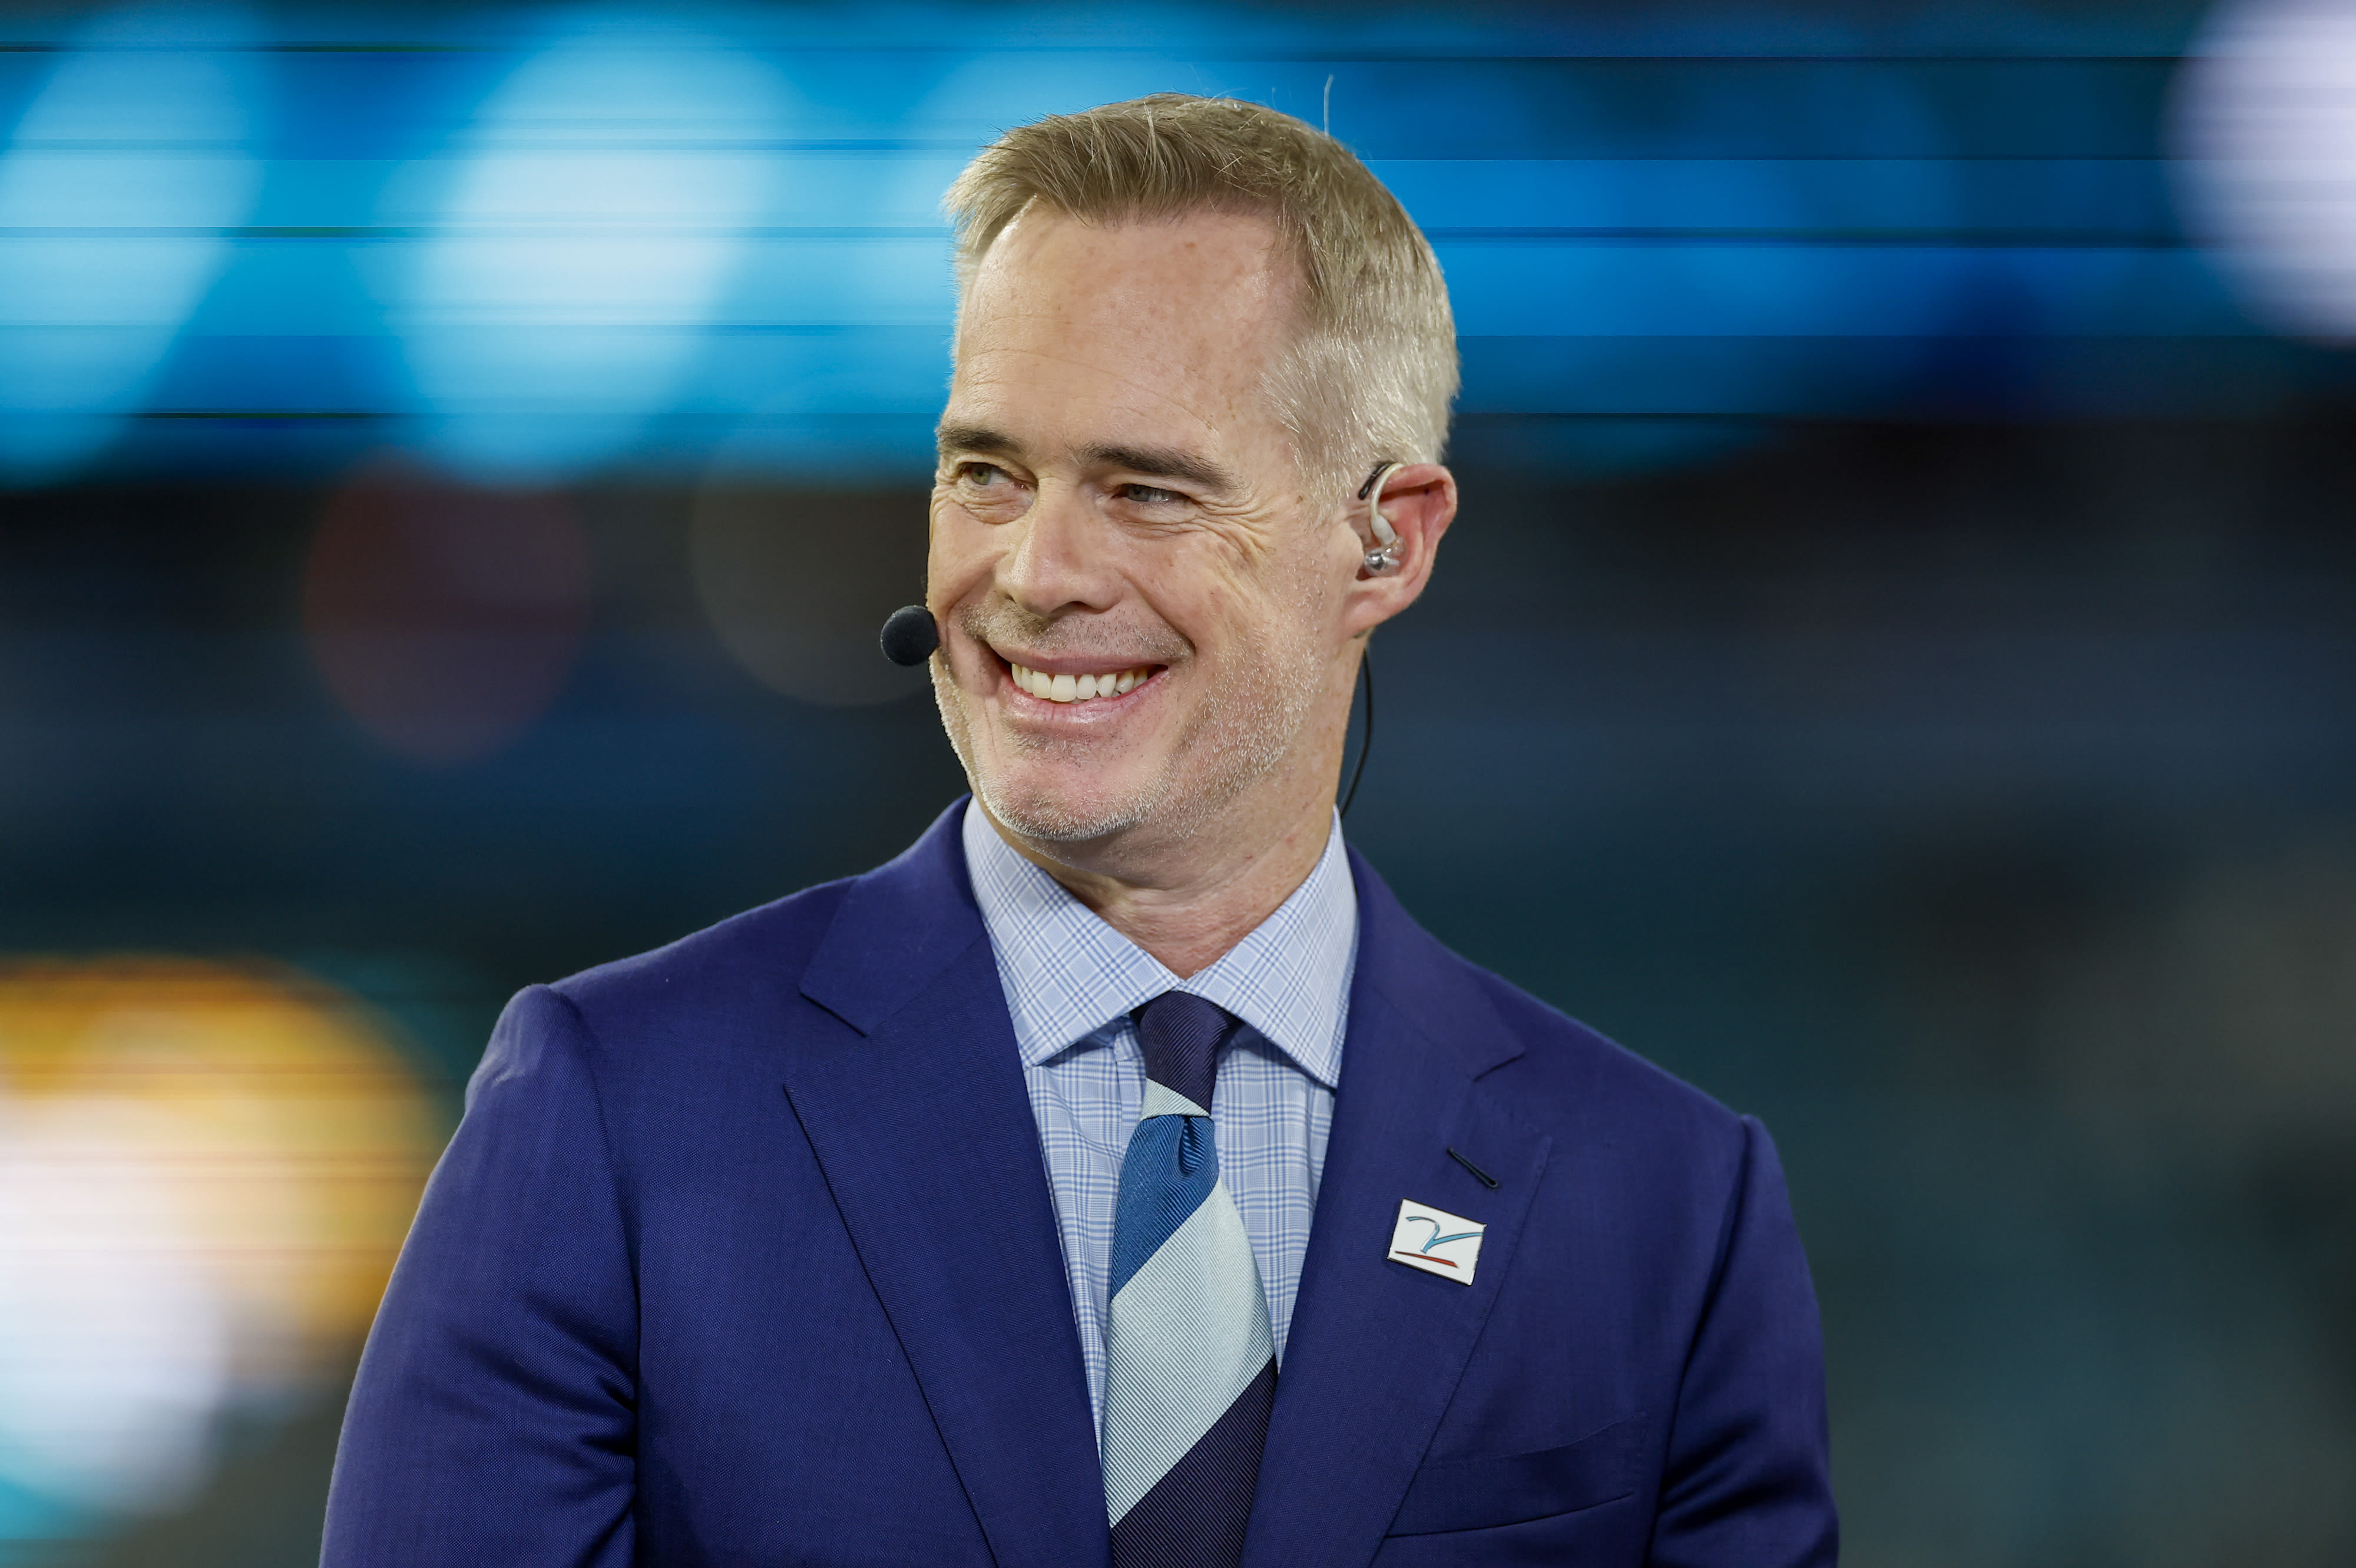 Joe Buck's return to MLB broadcasting gets rained out in Cubs-Cardinals